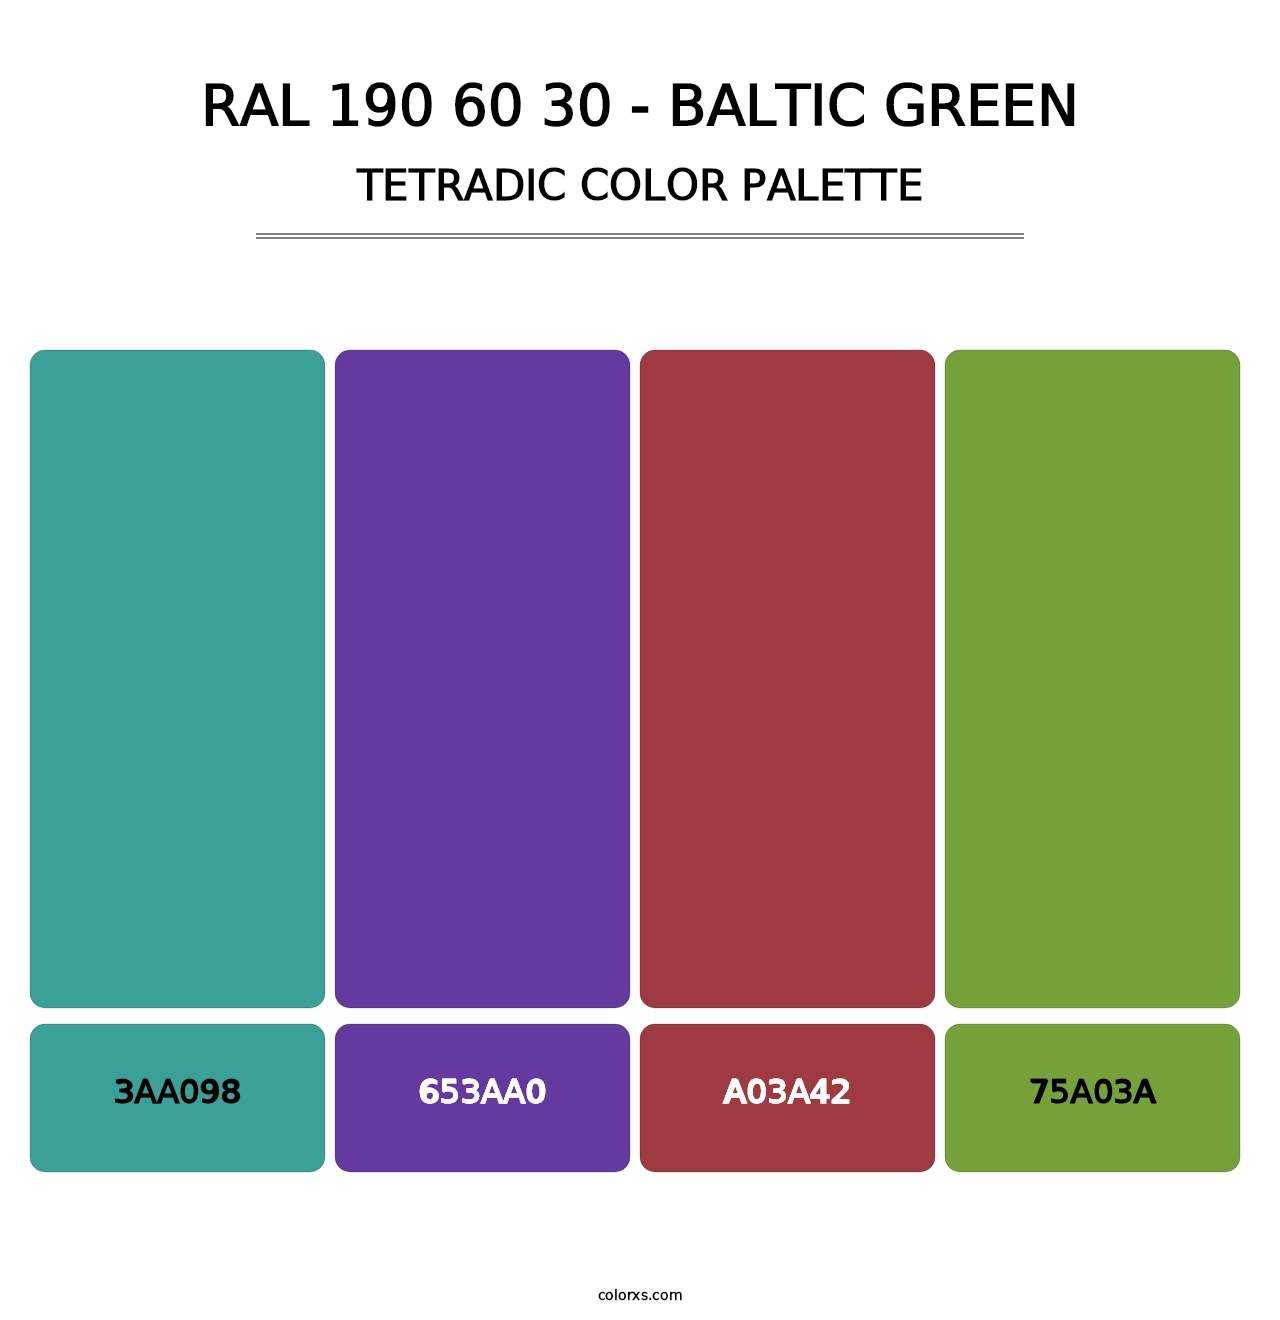 RAL 190 60 30 - Baltic Green - Tetradic Color Palette